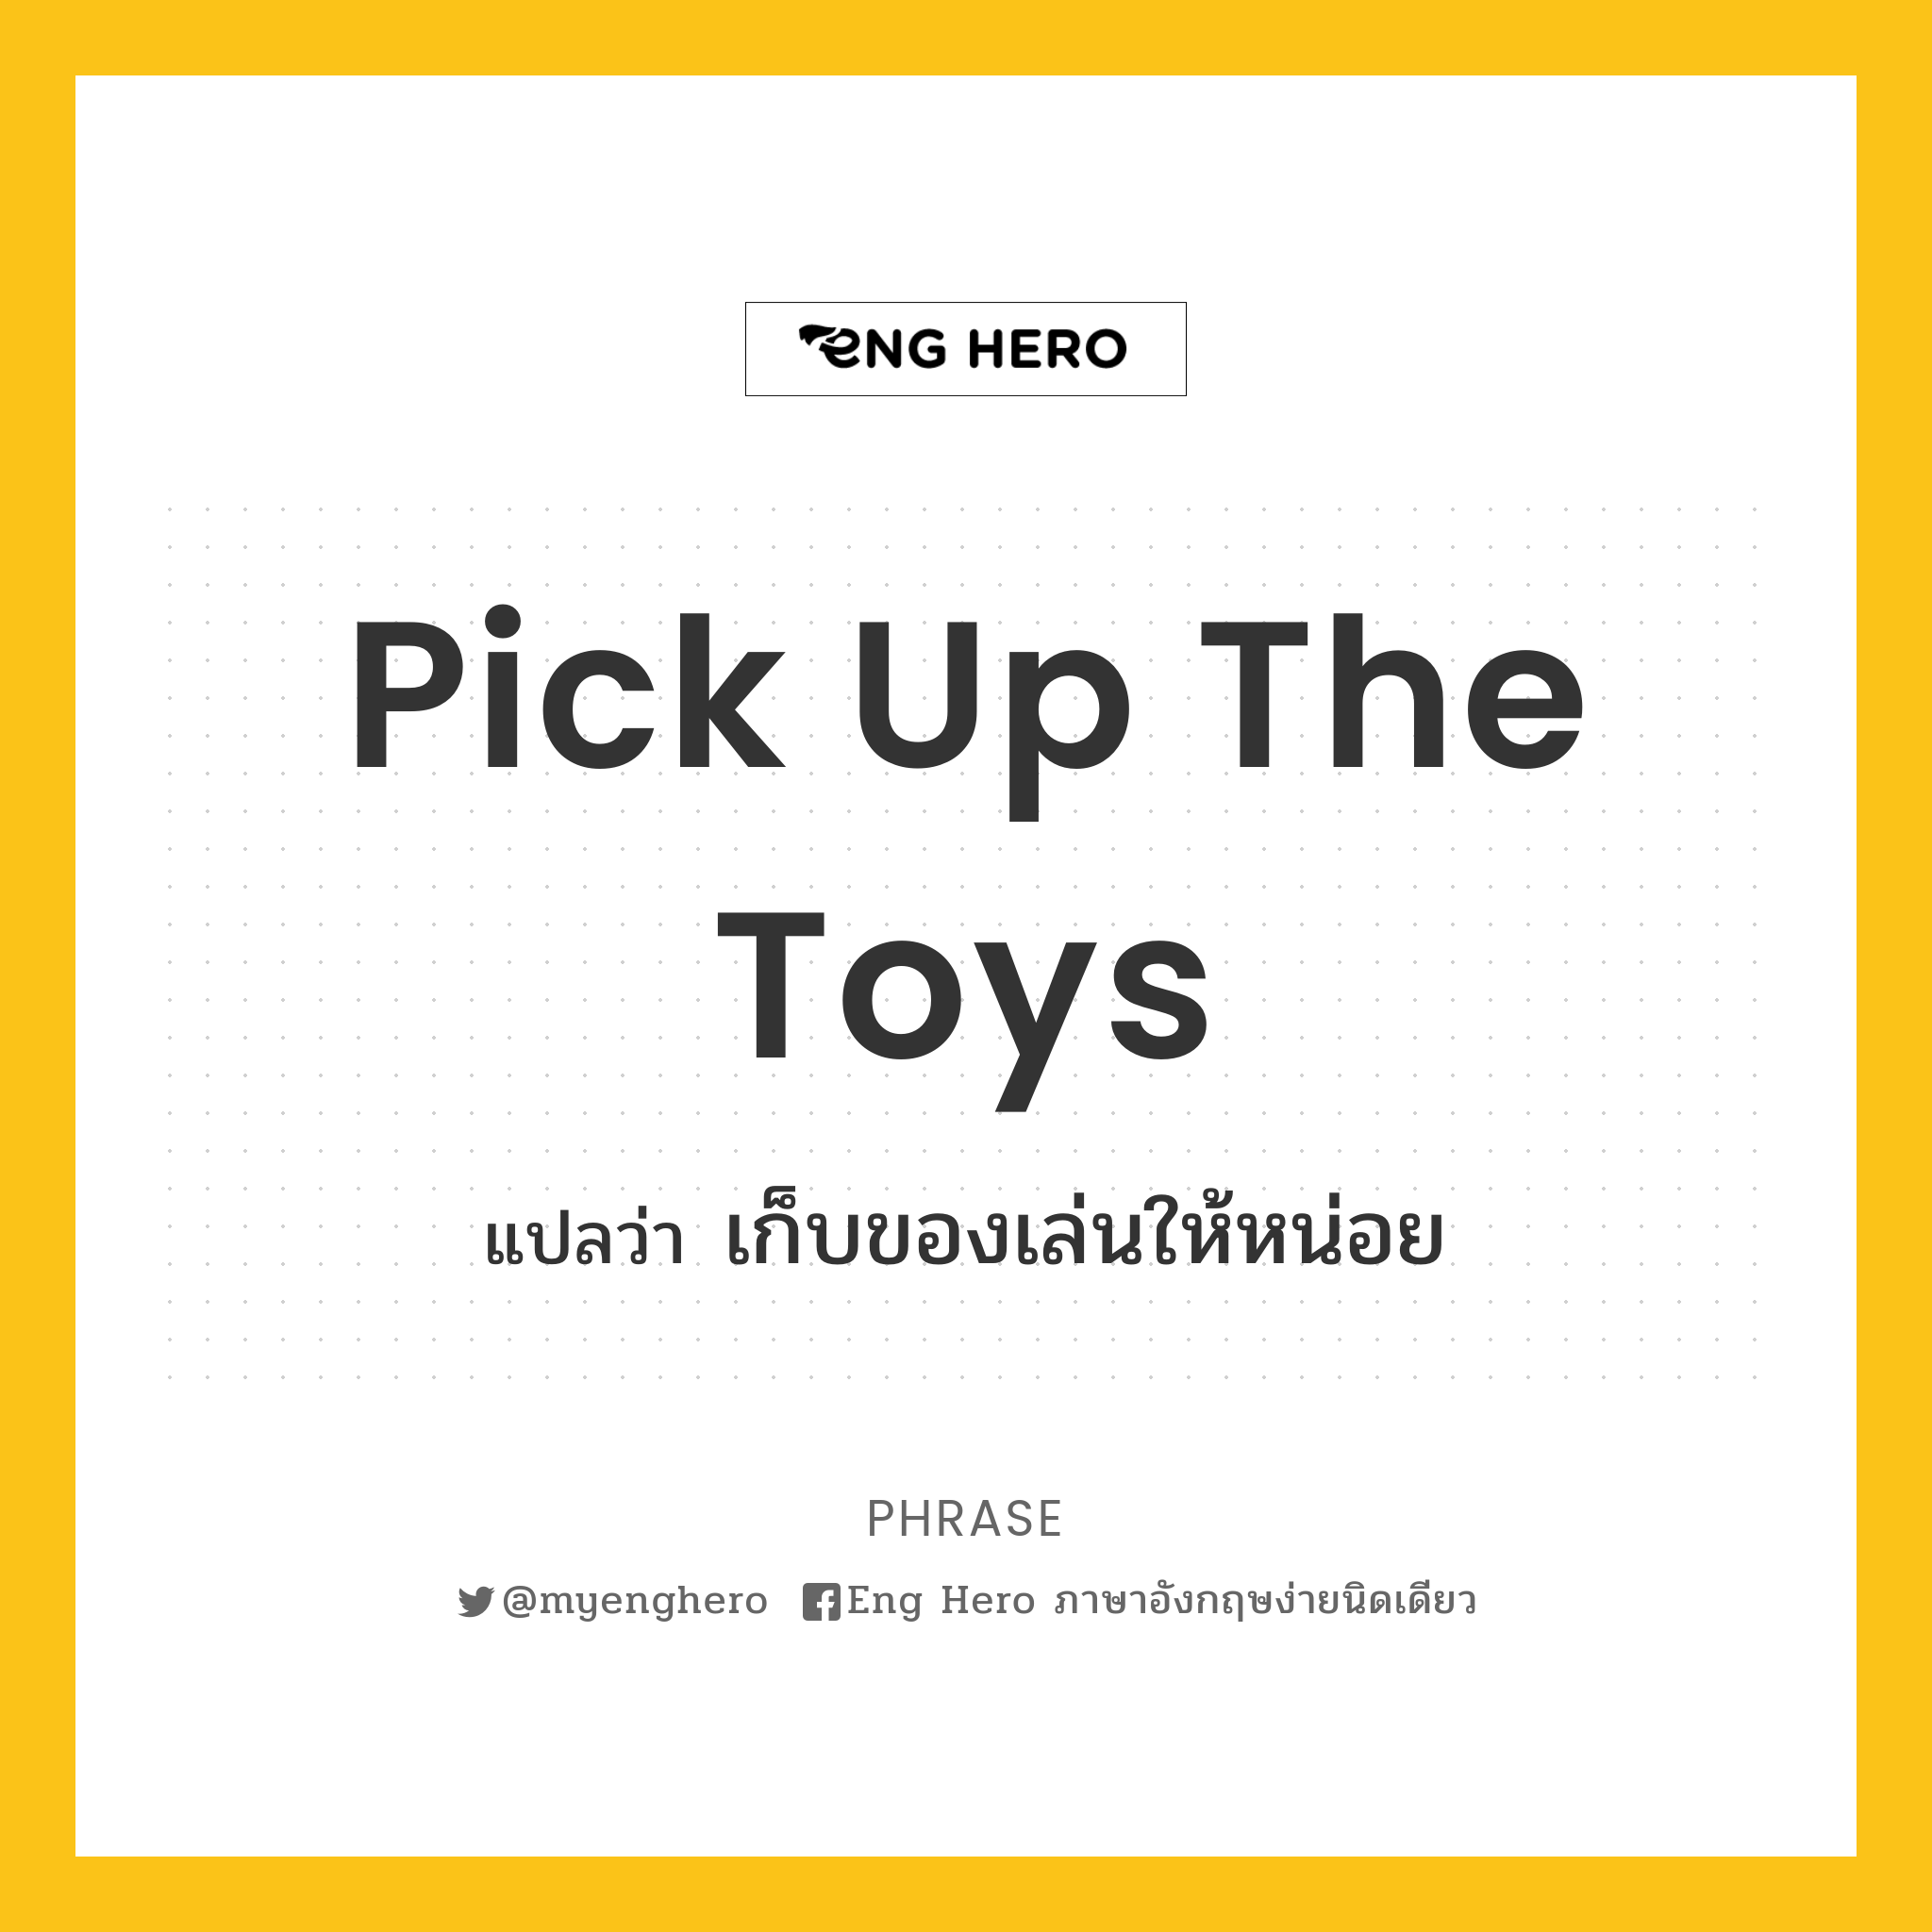 Pick up the toys